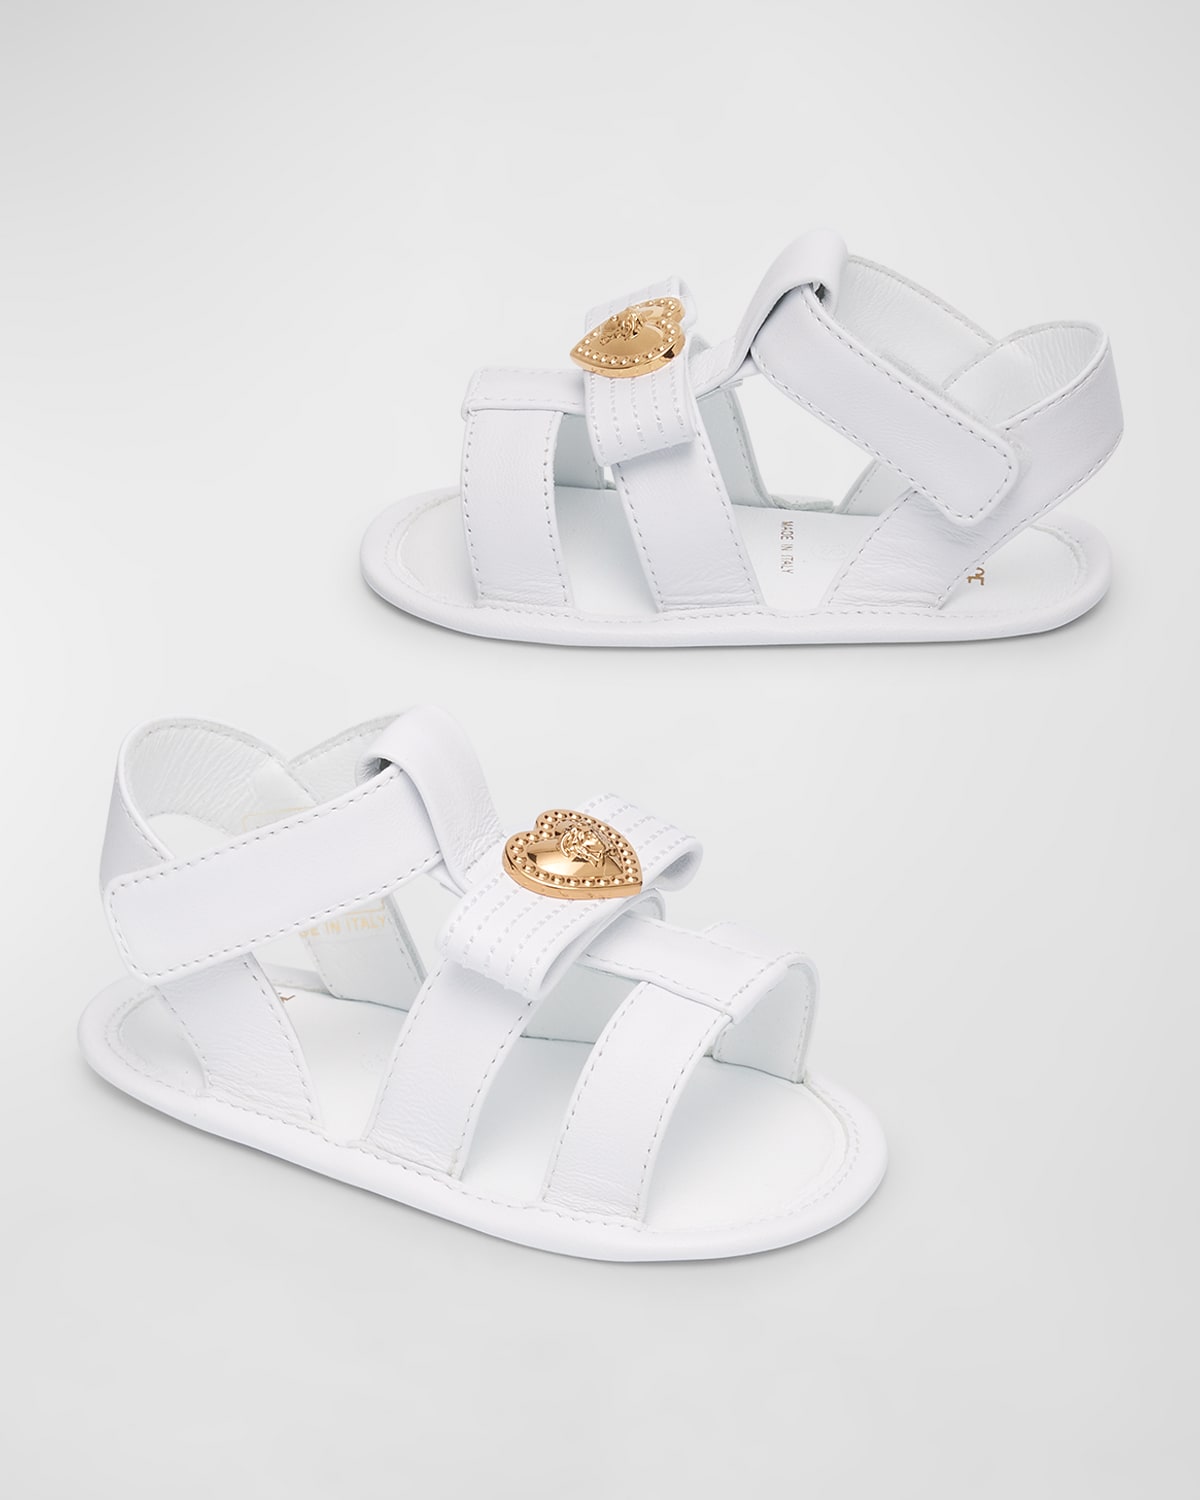 Shop Versace Girl's Leather Sandals W/ Medusa Pendant, Baby In White Gold